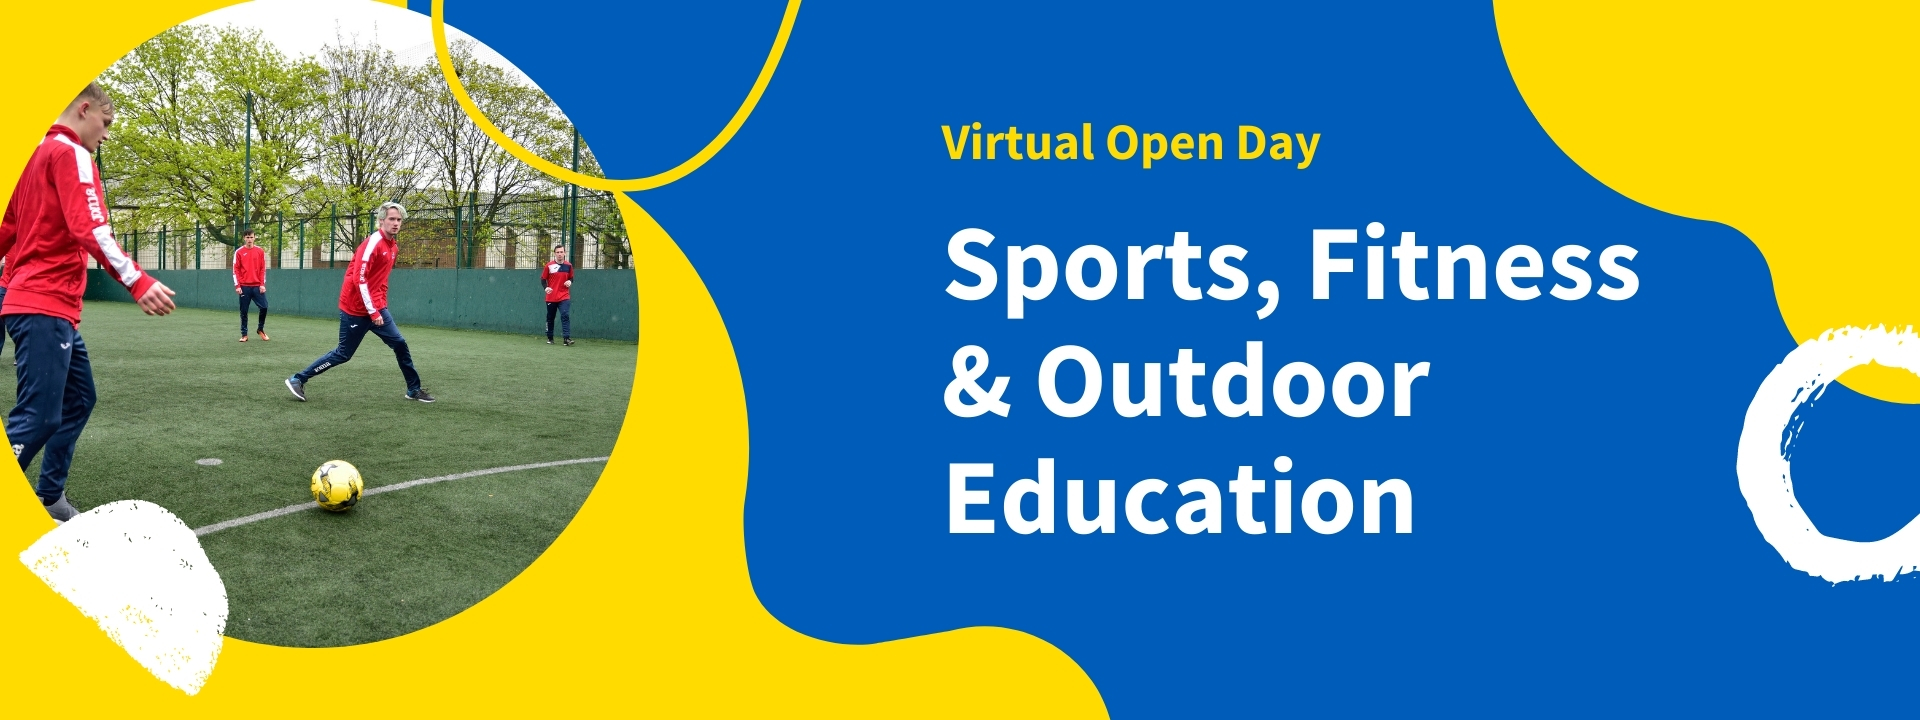 Sports, Fitness & Outdoor Education